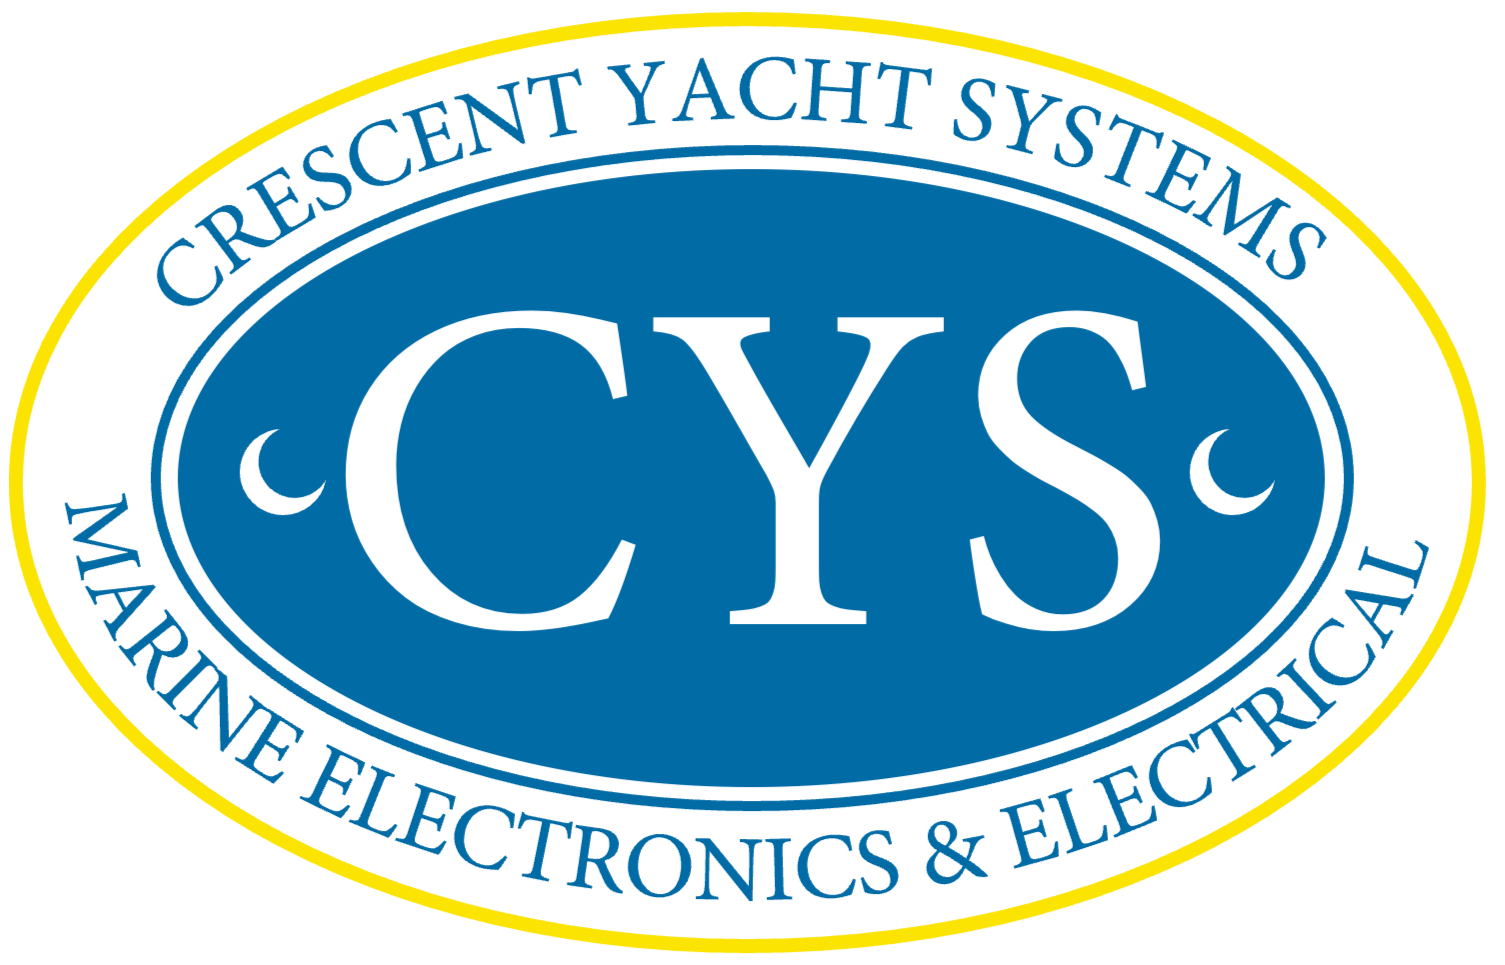 Crescent Yacht Systems